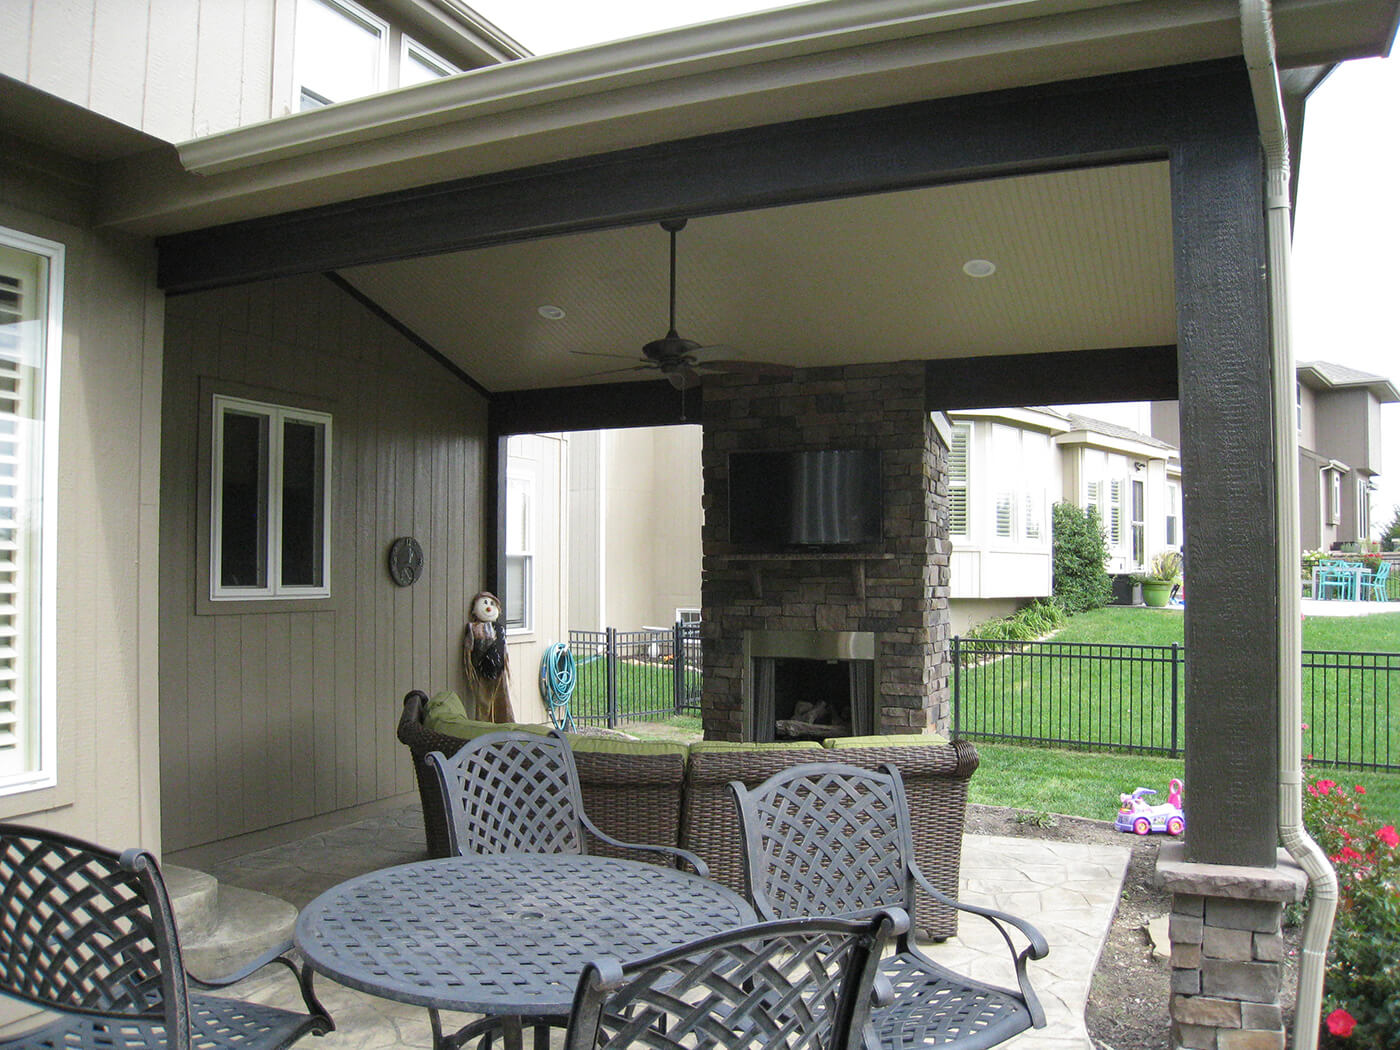 Seating area on porch